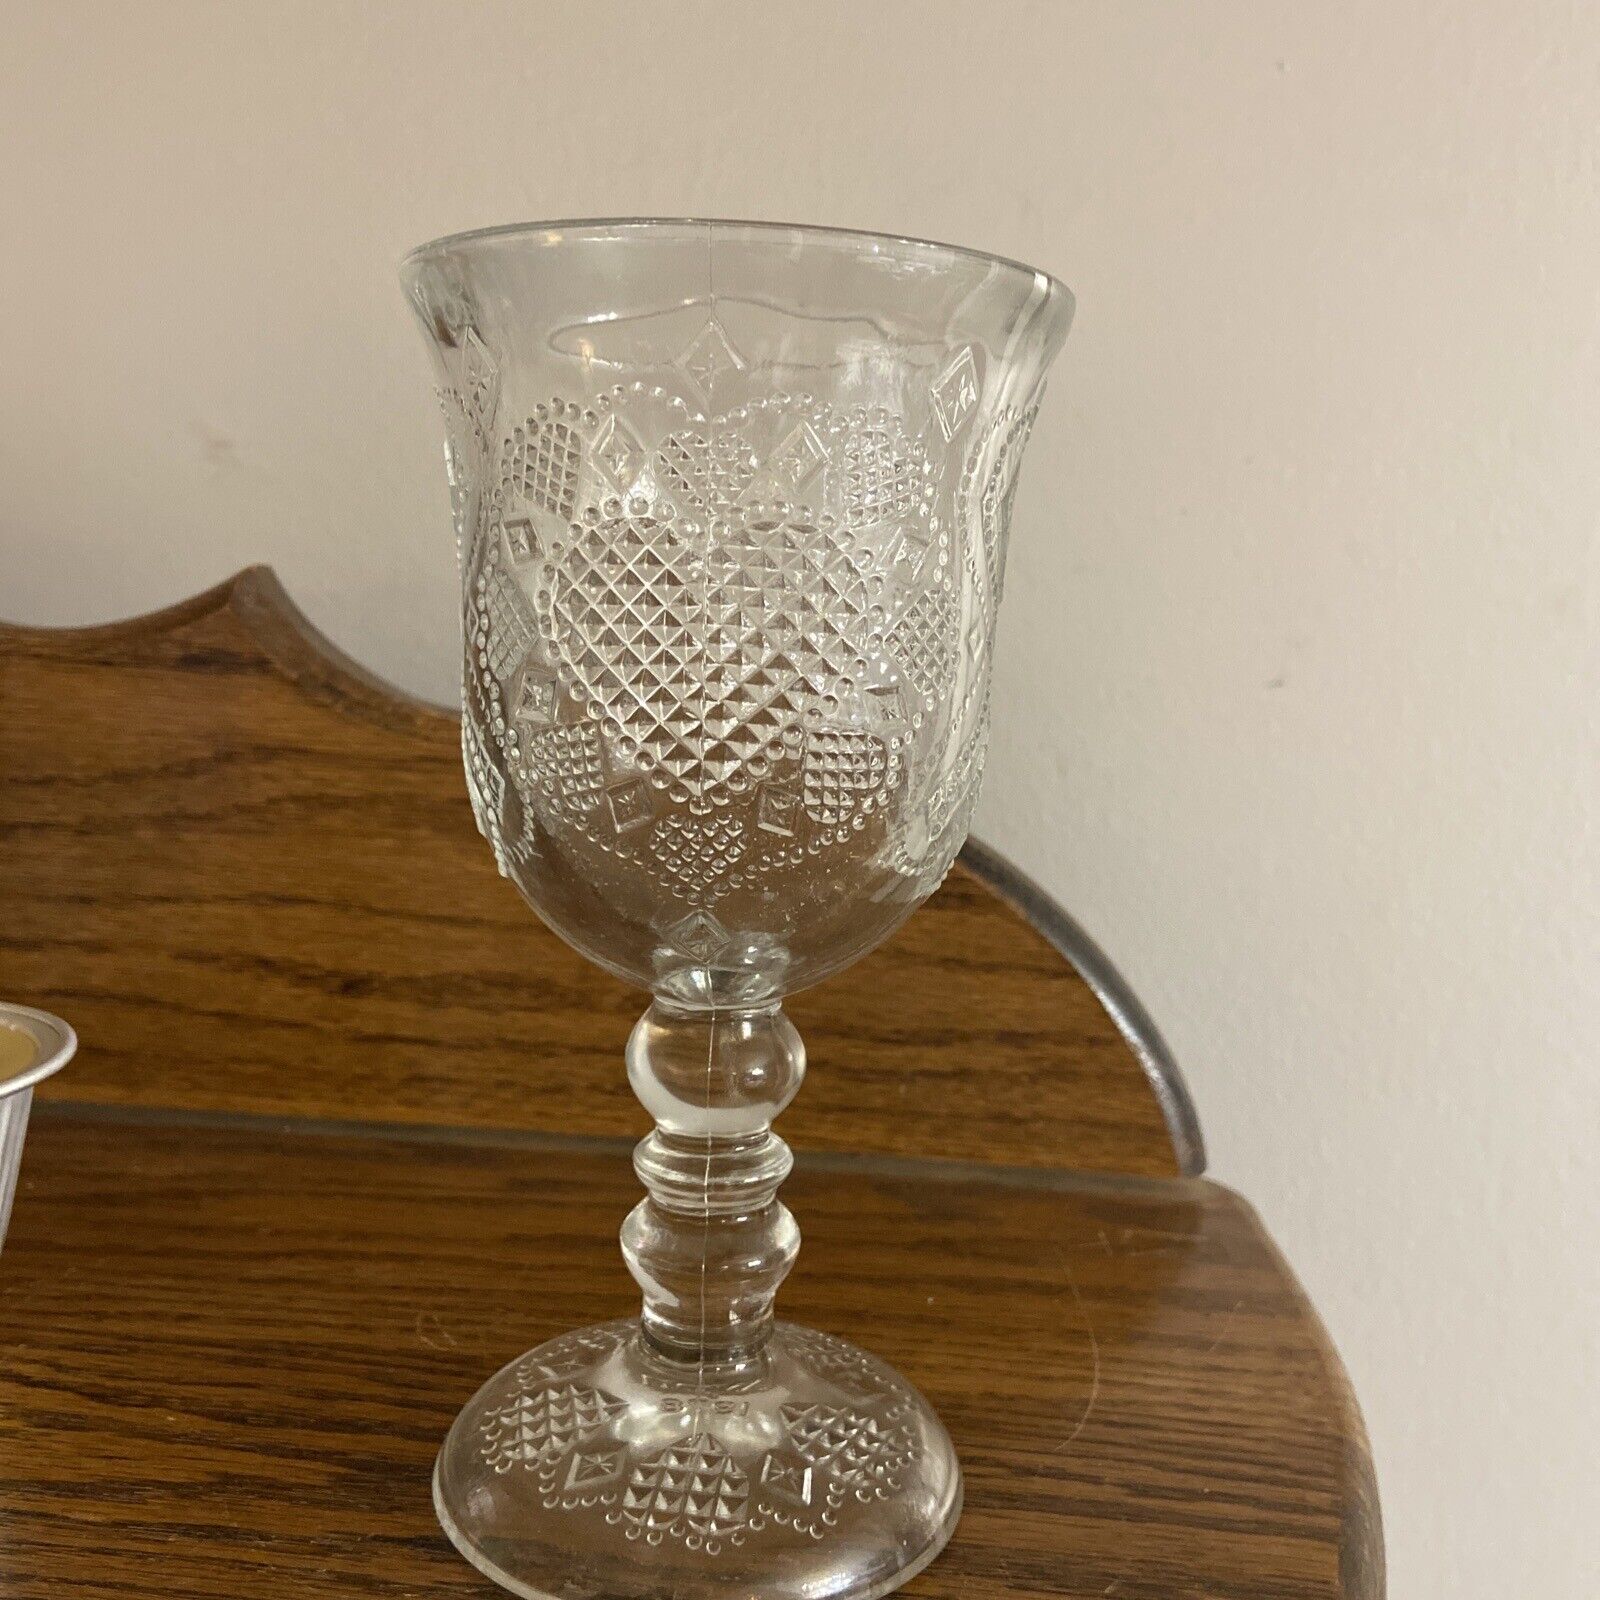 Vintage Avon 1978 Candle Holder Diamond Cut Heart Pattern 7 Inches Tall